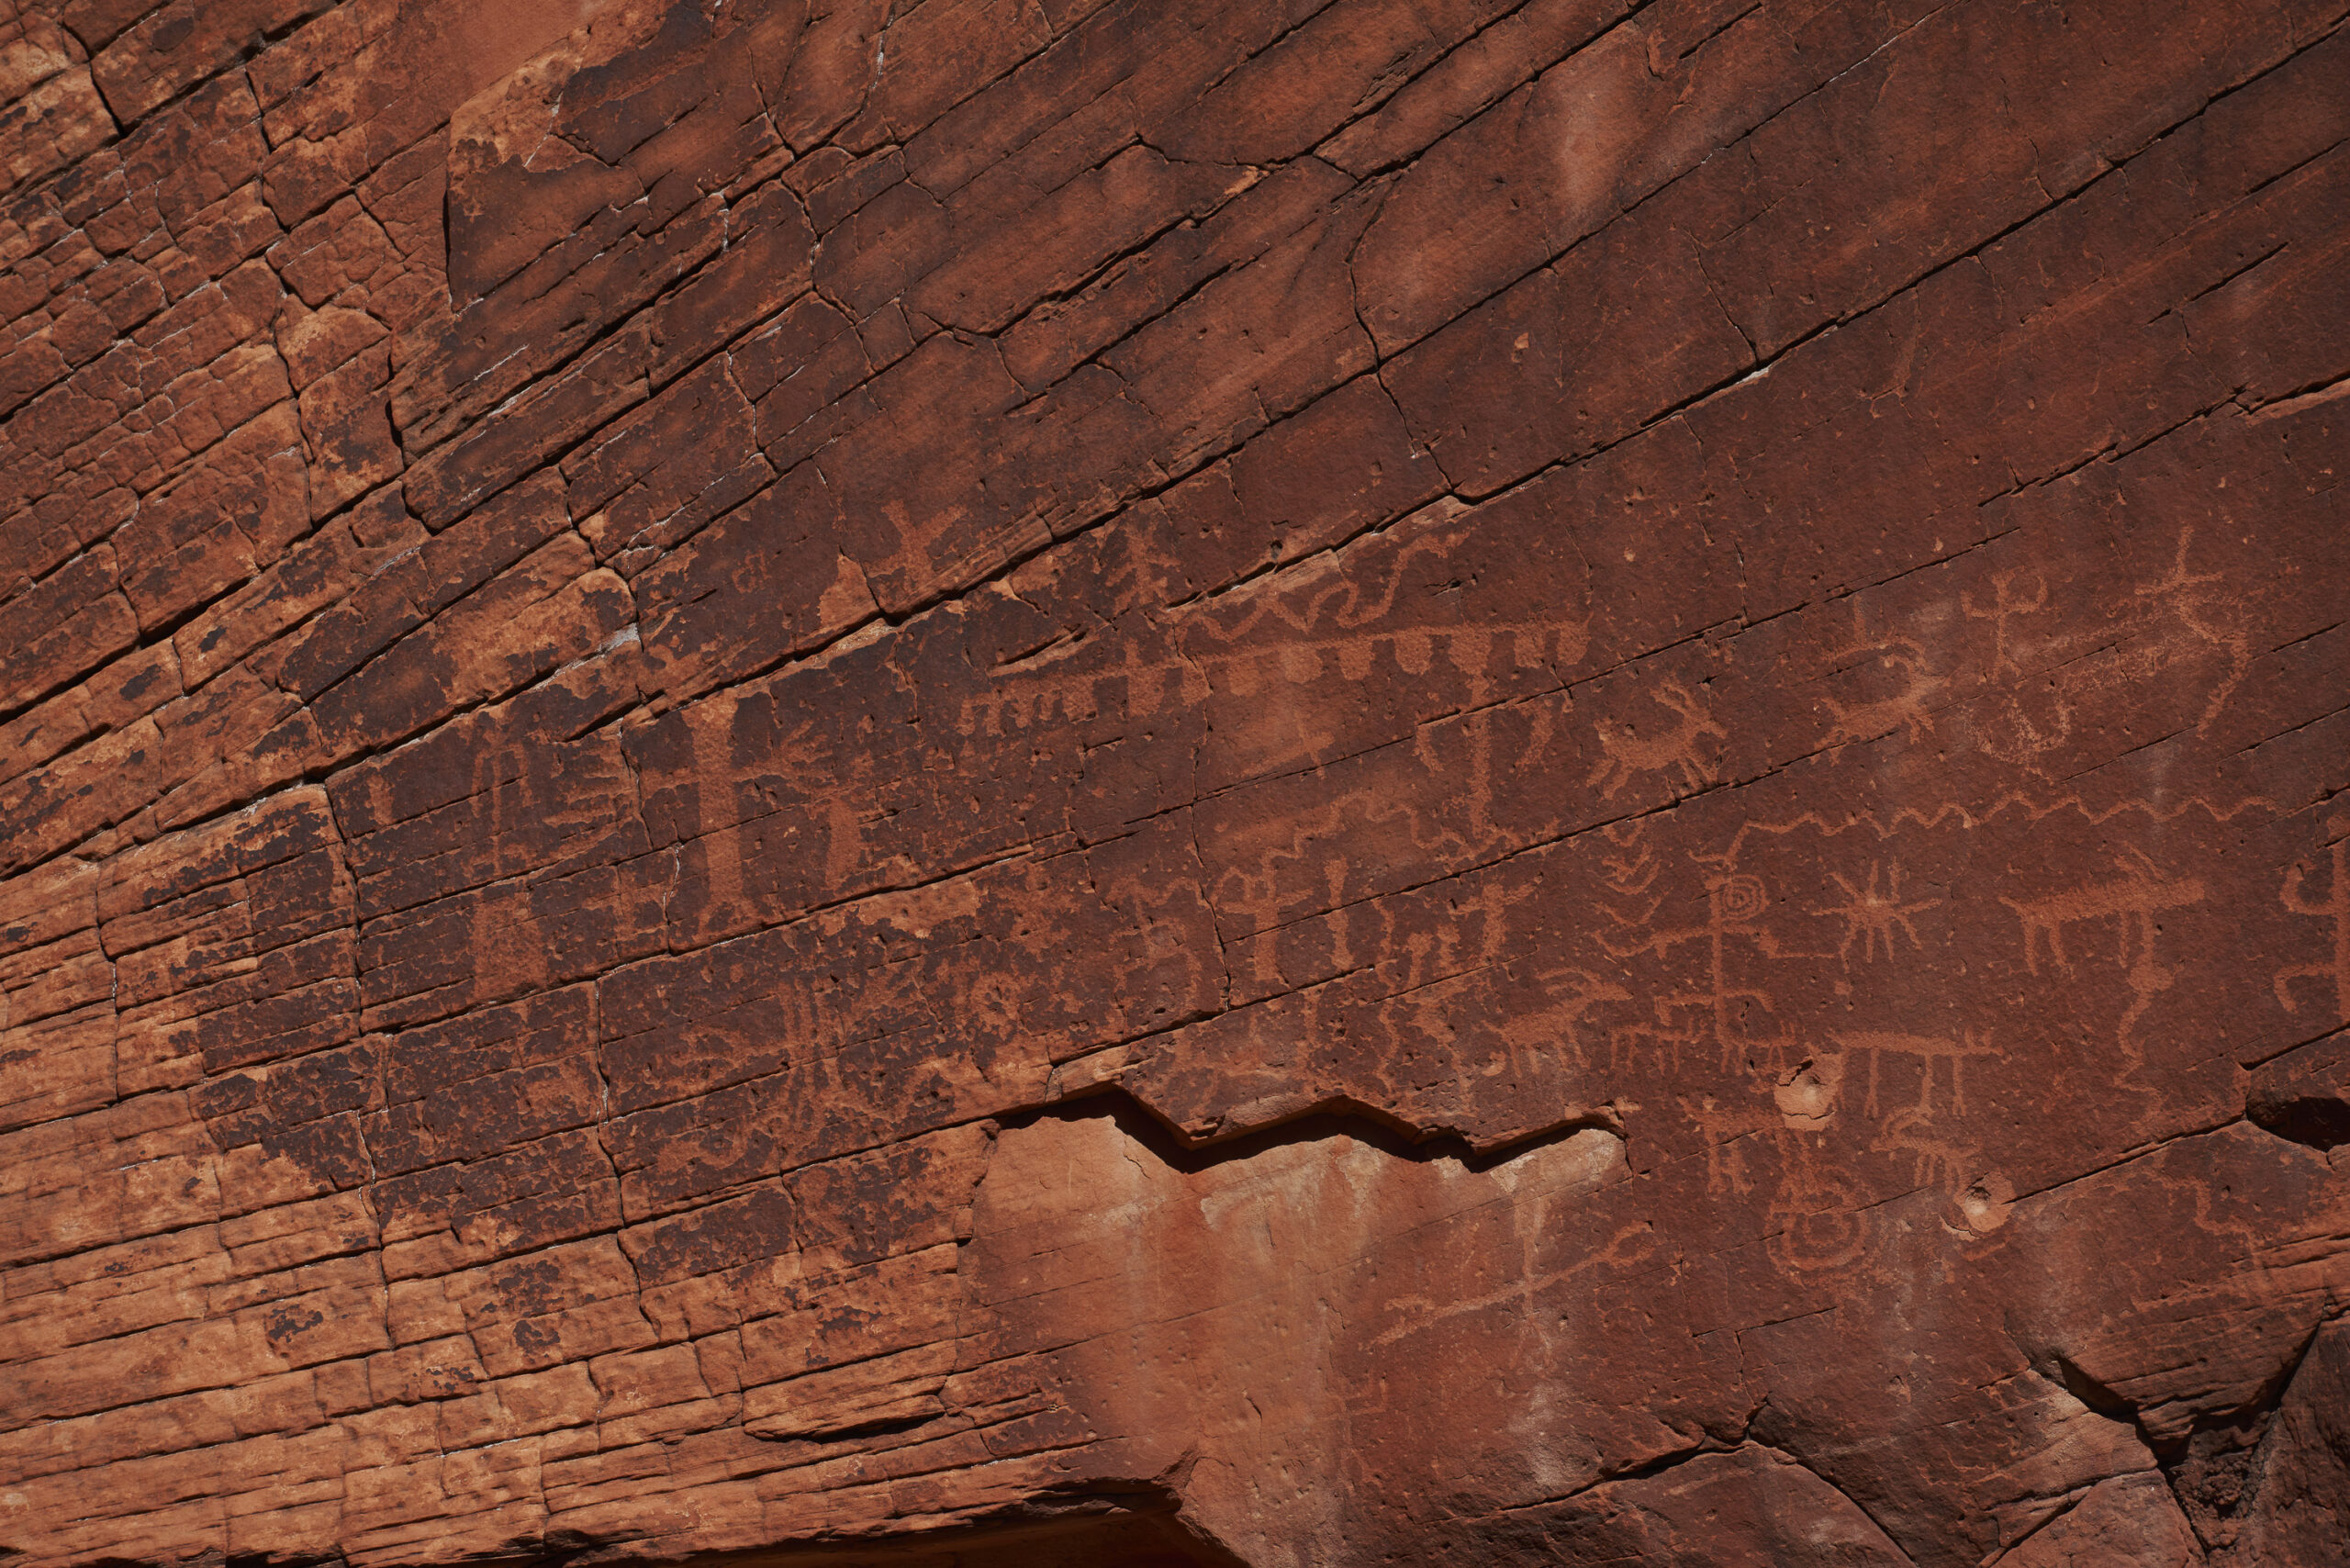 Petroglyphs in Gold Butte National Monument